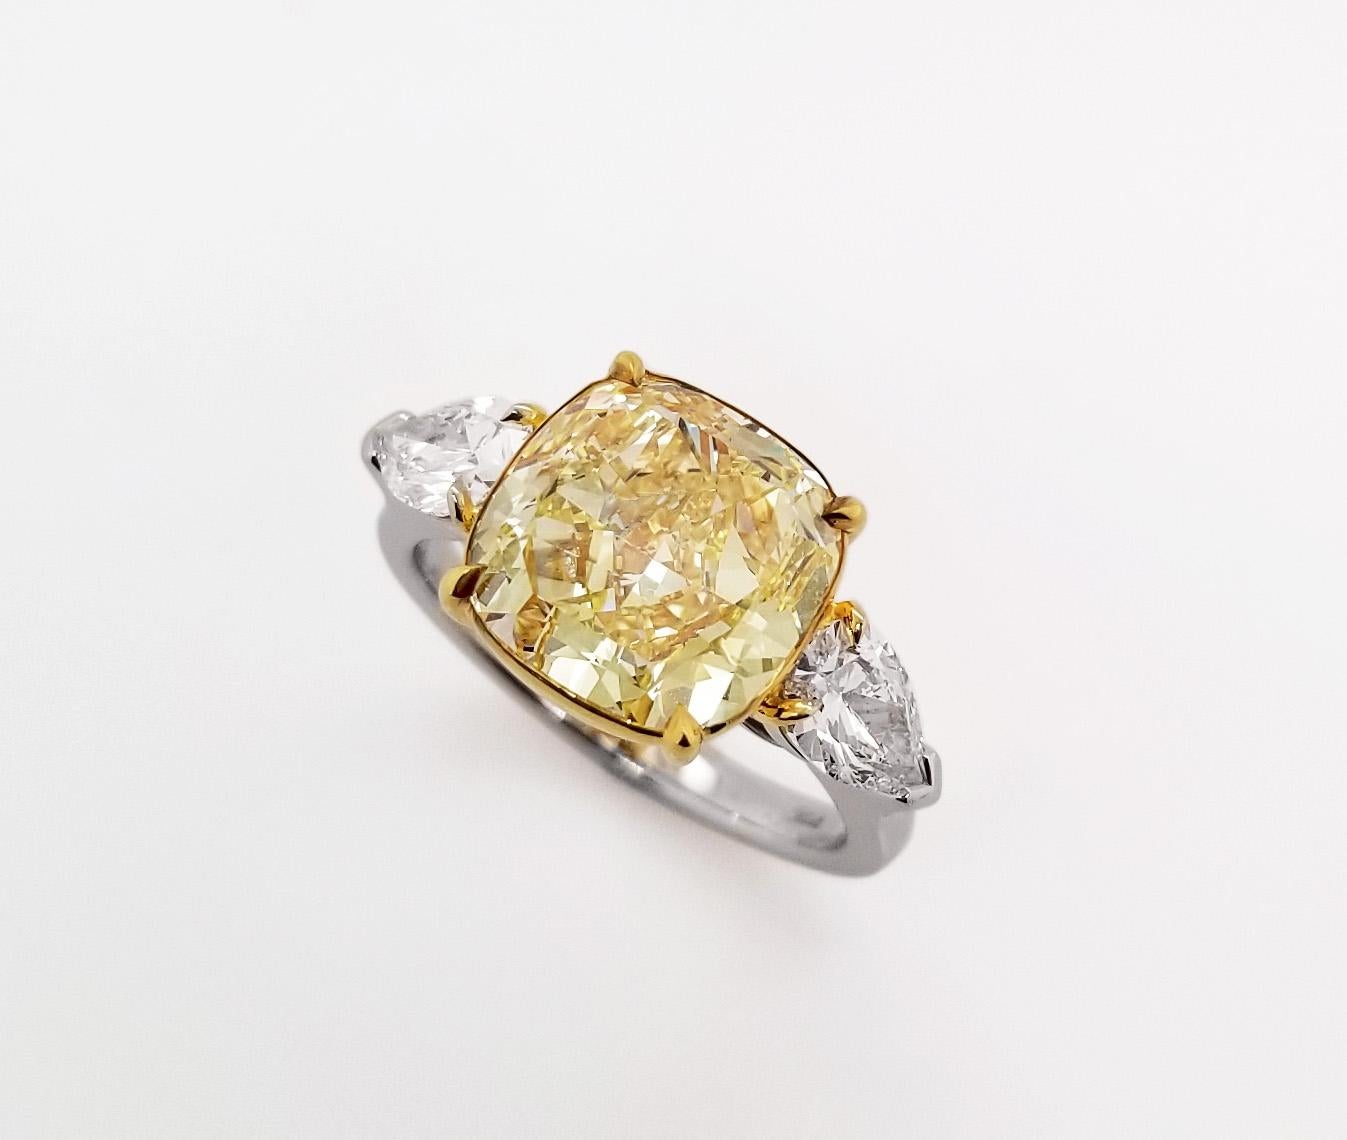 From SCARSELLI, this 5-carat Fancy Yellow Diamond GIA certified (see certificate picture for detailed stone information). The diamond is flanked by a pair of pear shape  1.01 carats together VS clarity. This ring may be sized with Scarselli to